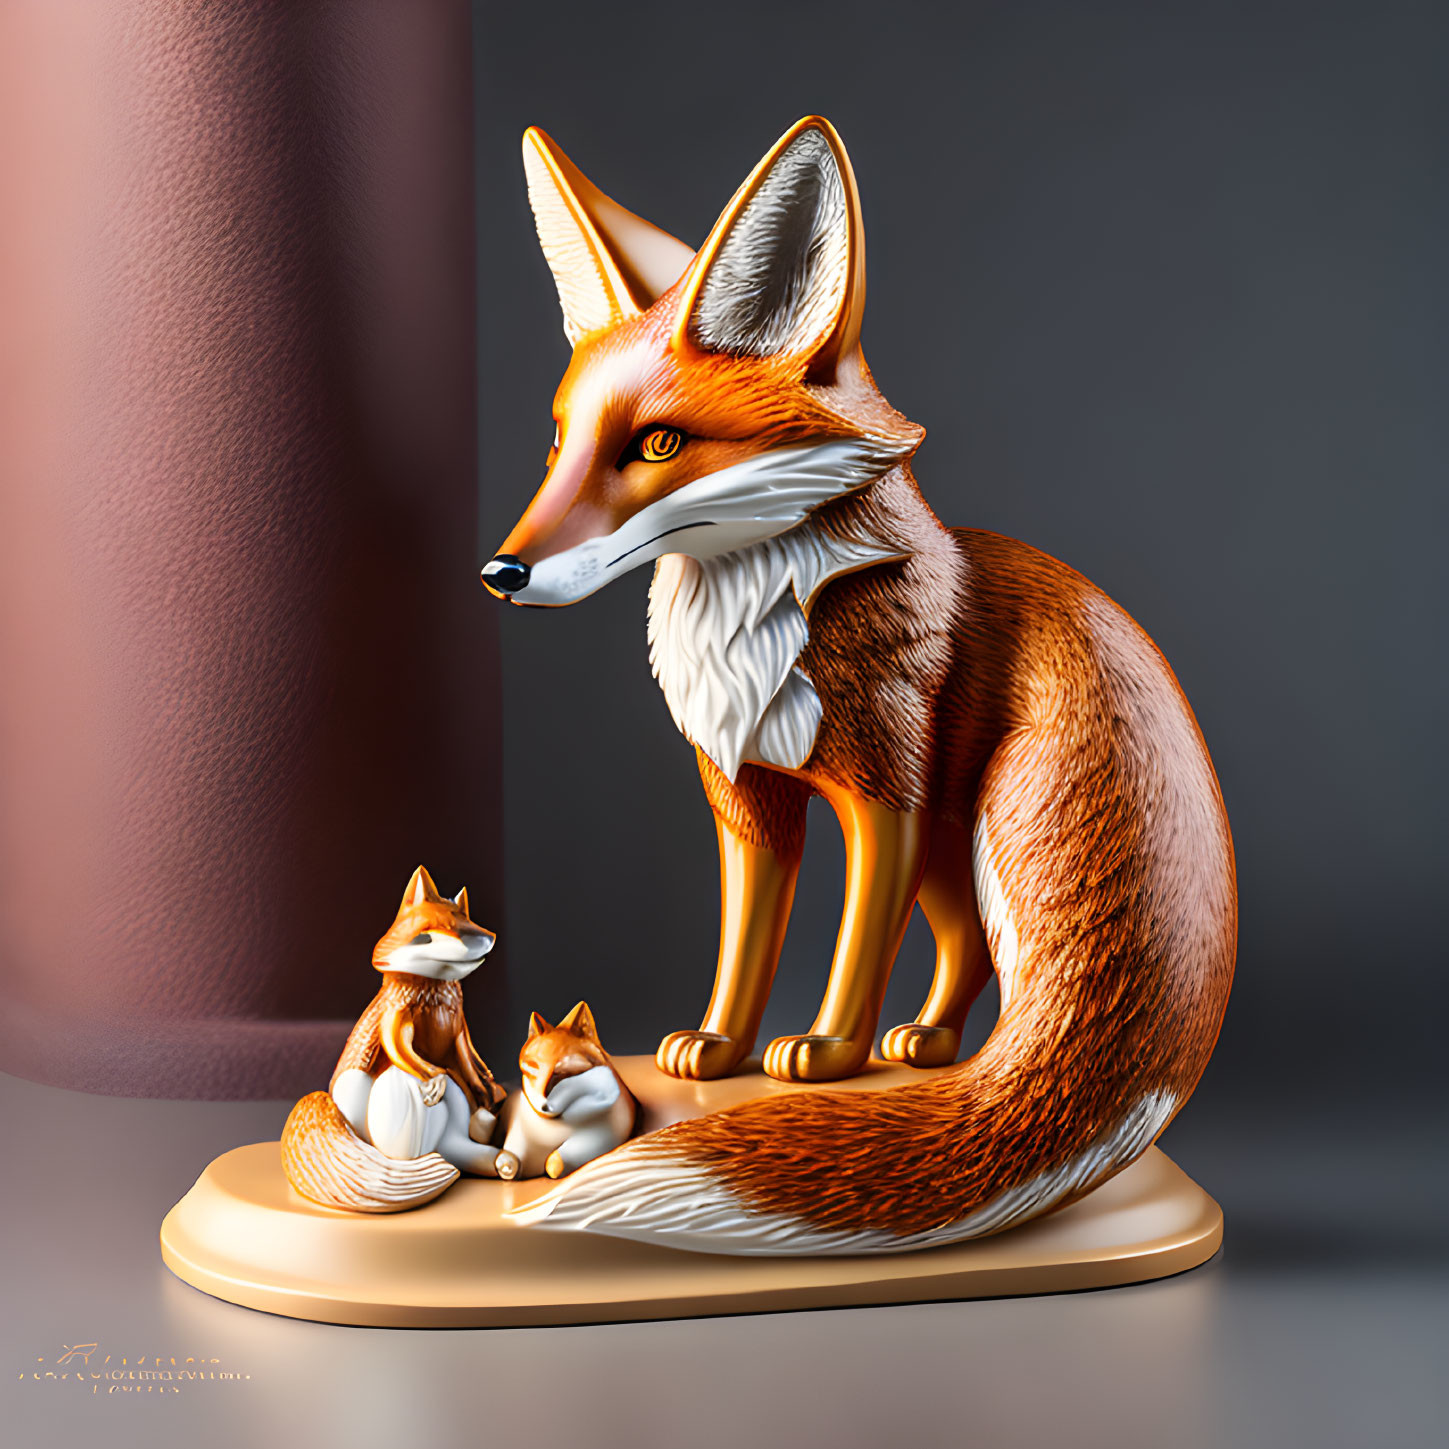 Realistic adult fox figurine with two cubs on wooden base in dark setting